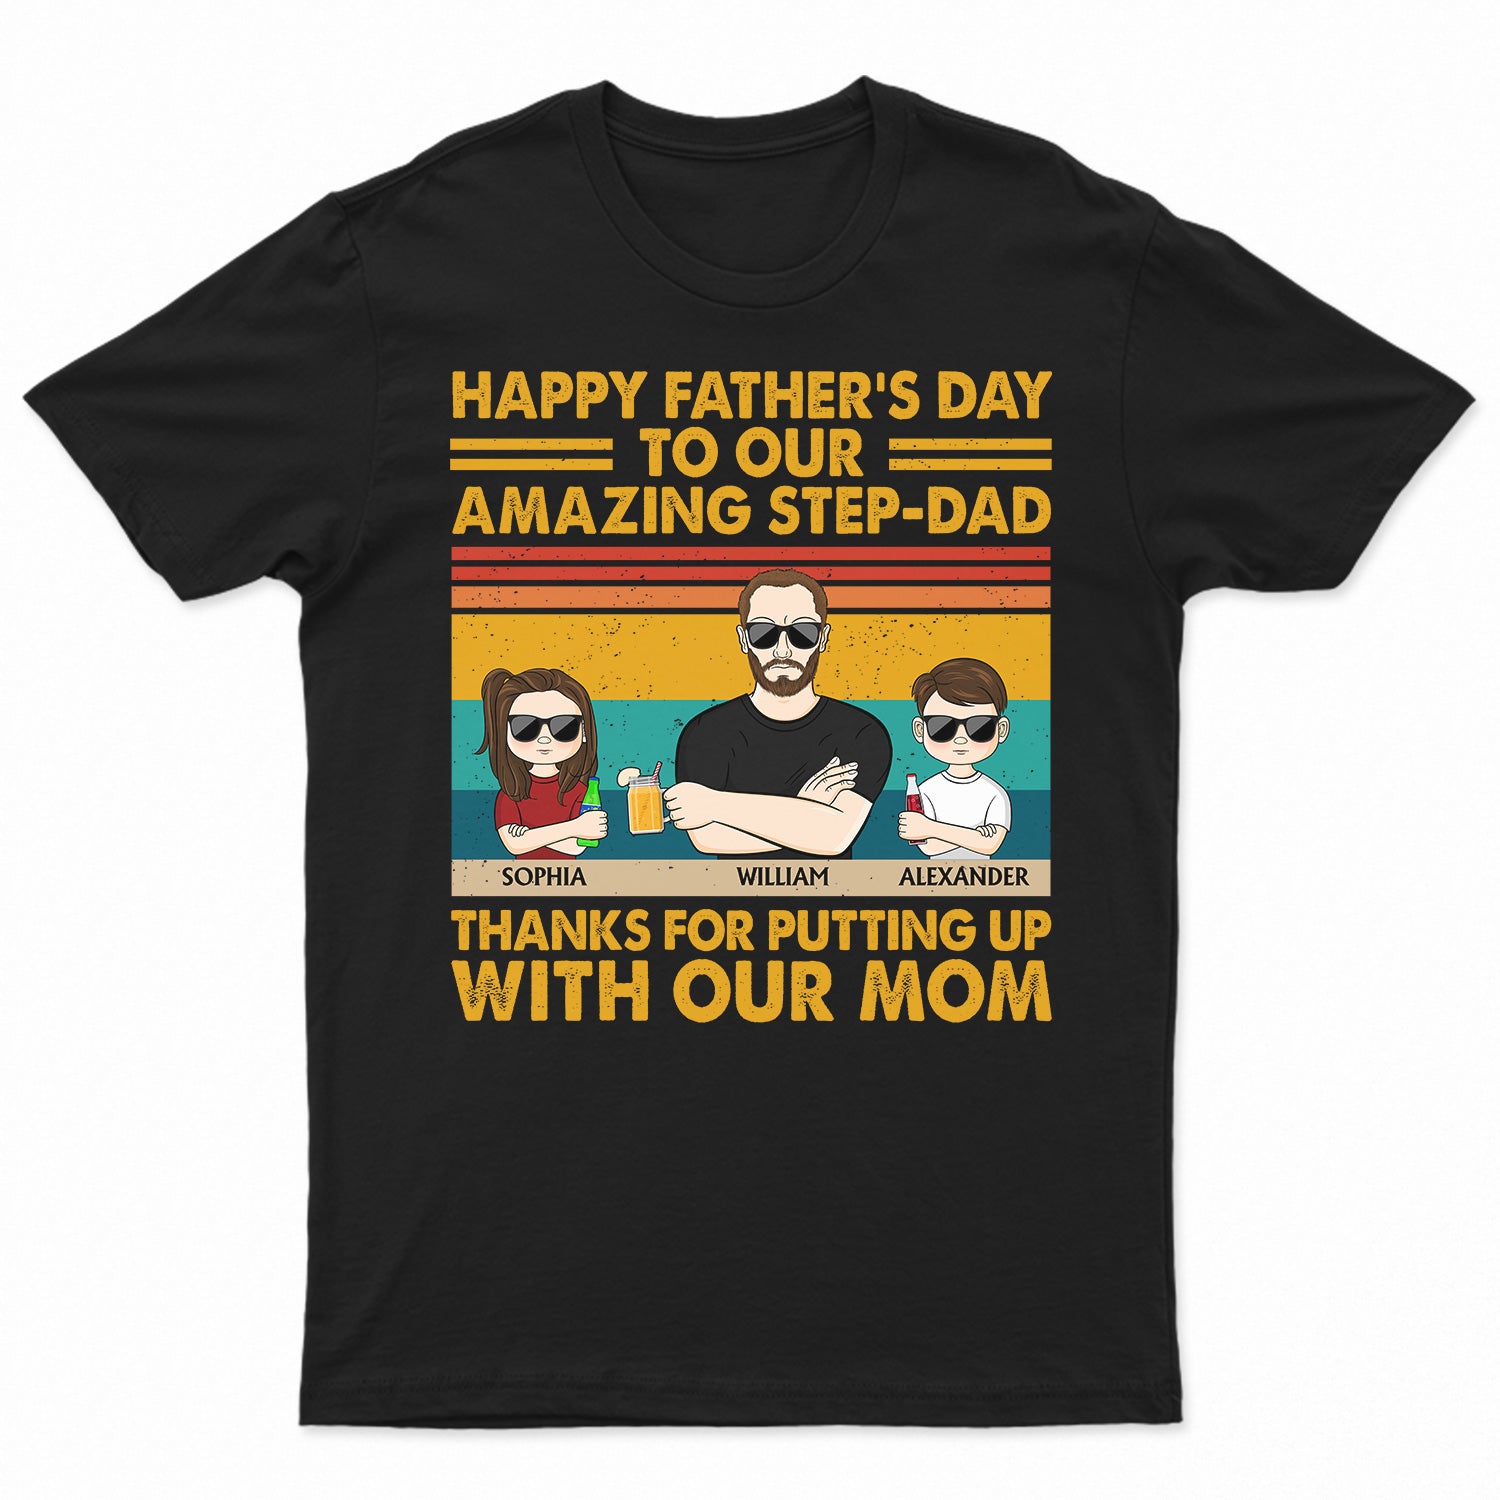 To Our Amazing Step-Dad Thanks For Putting Up With Our Mom - Funny, Birthday Gift For Father, Papa, Husband - Personalized Custom T Shirt